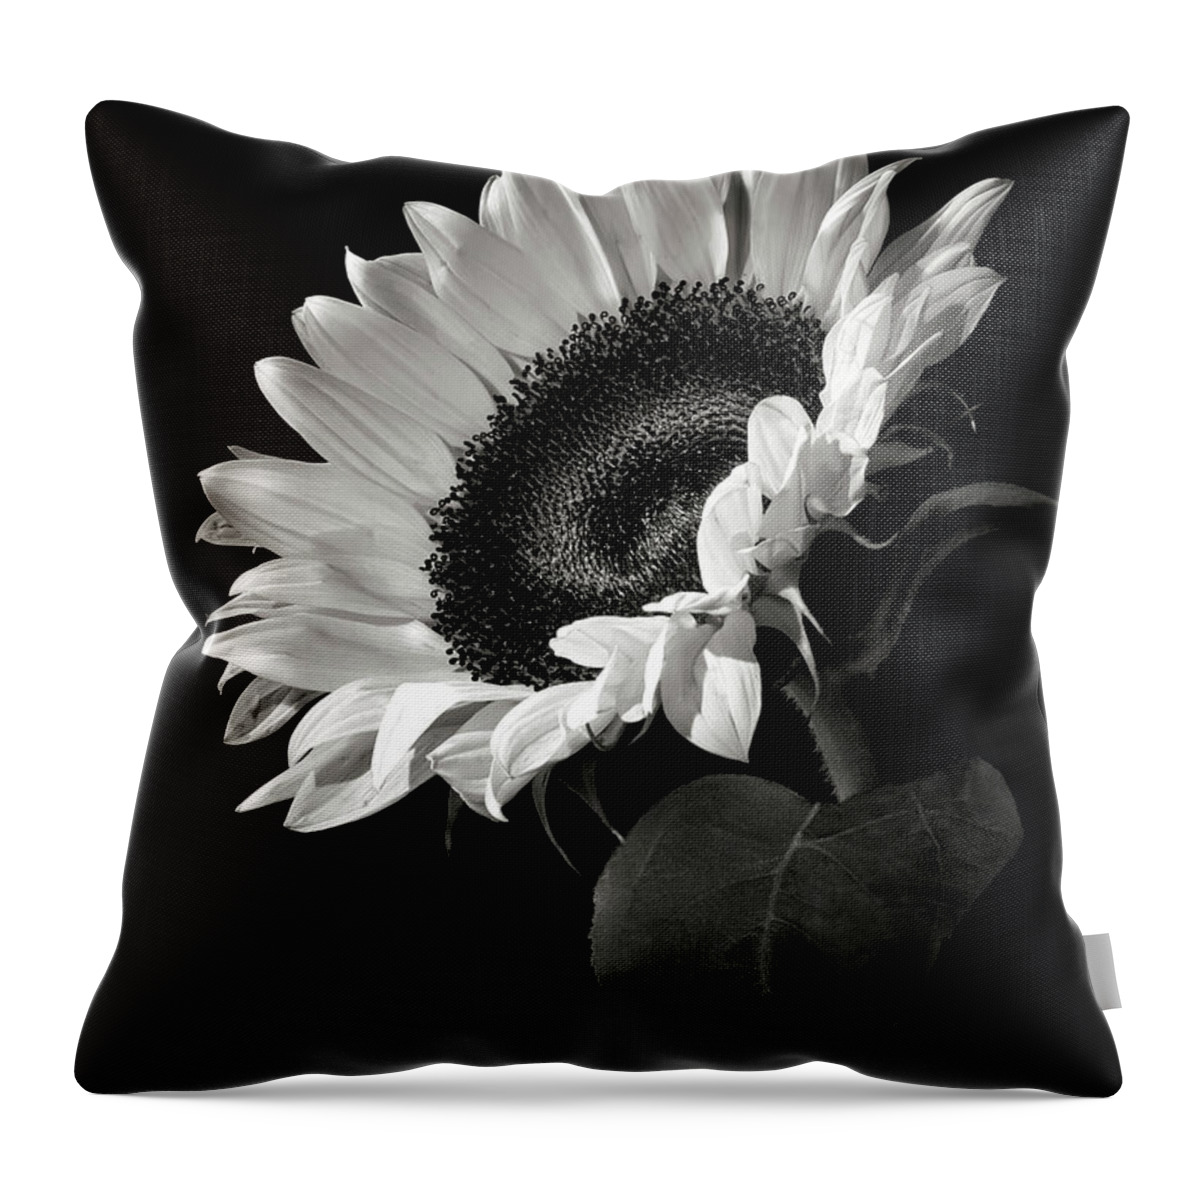 Flower Throw Pillow featuring the photograph Sunflower in Black and White by Endre Balogh